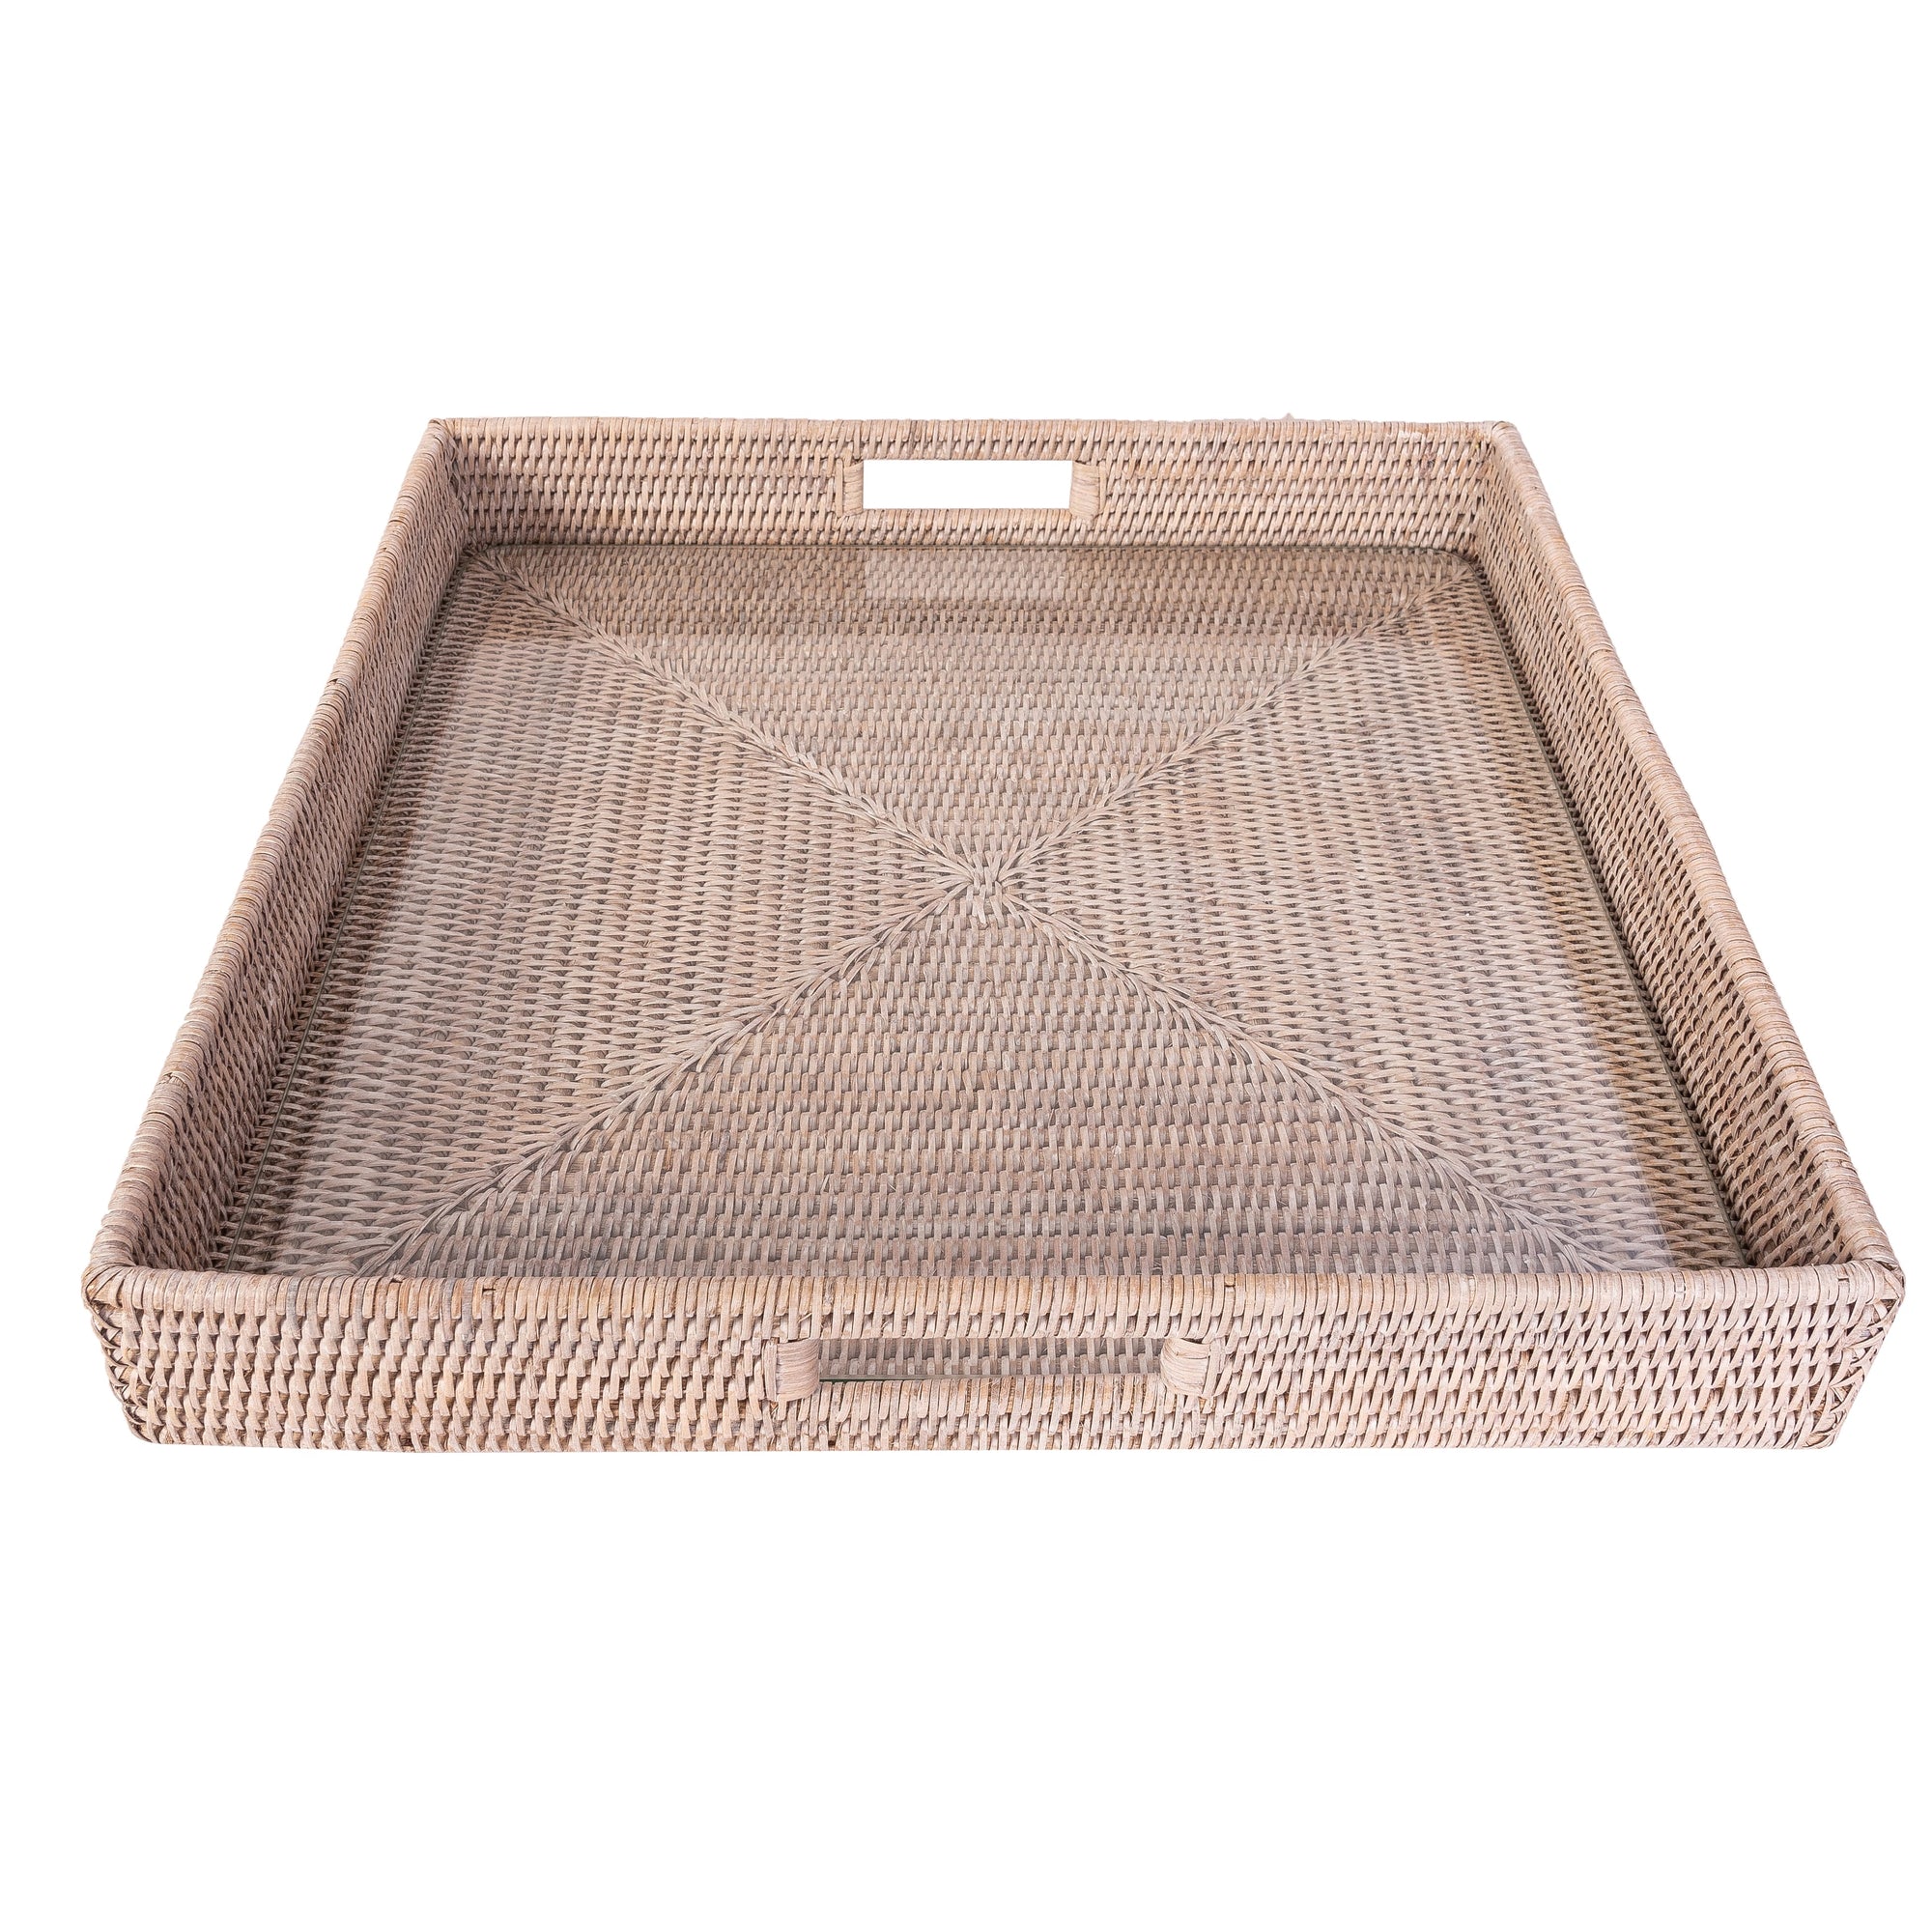 Square Serving Ottoman Trays with Glass Insert